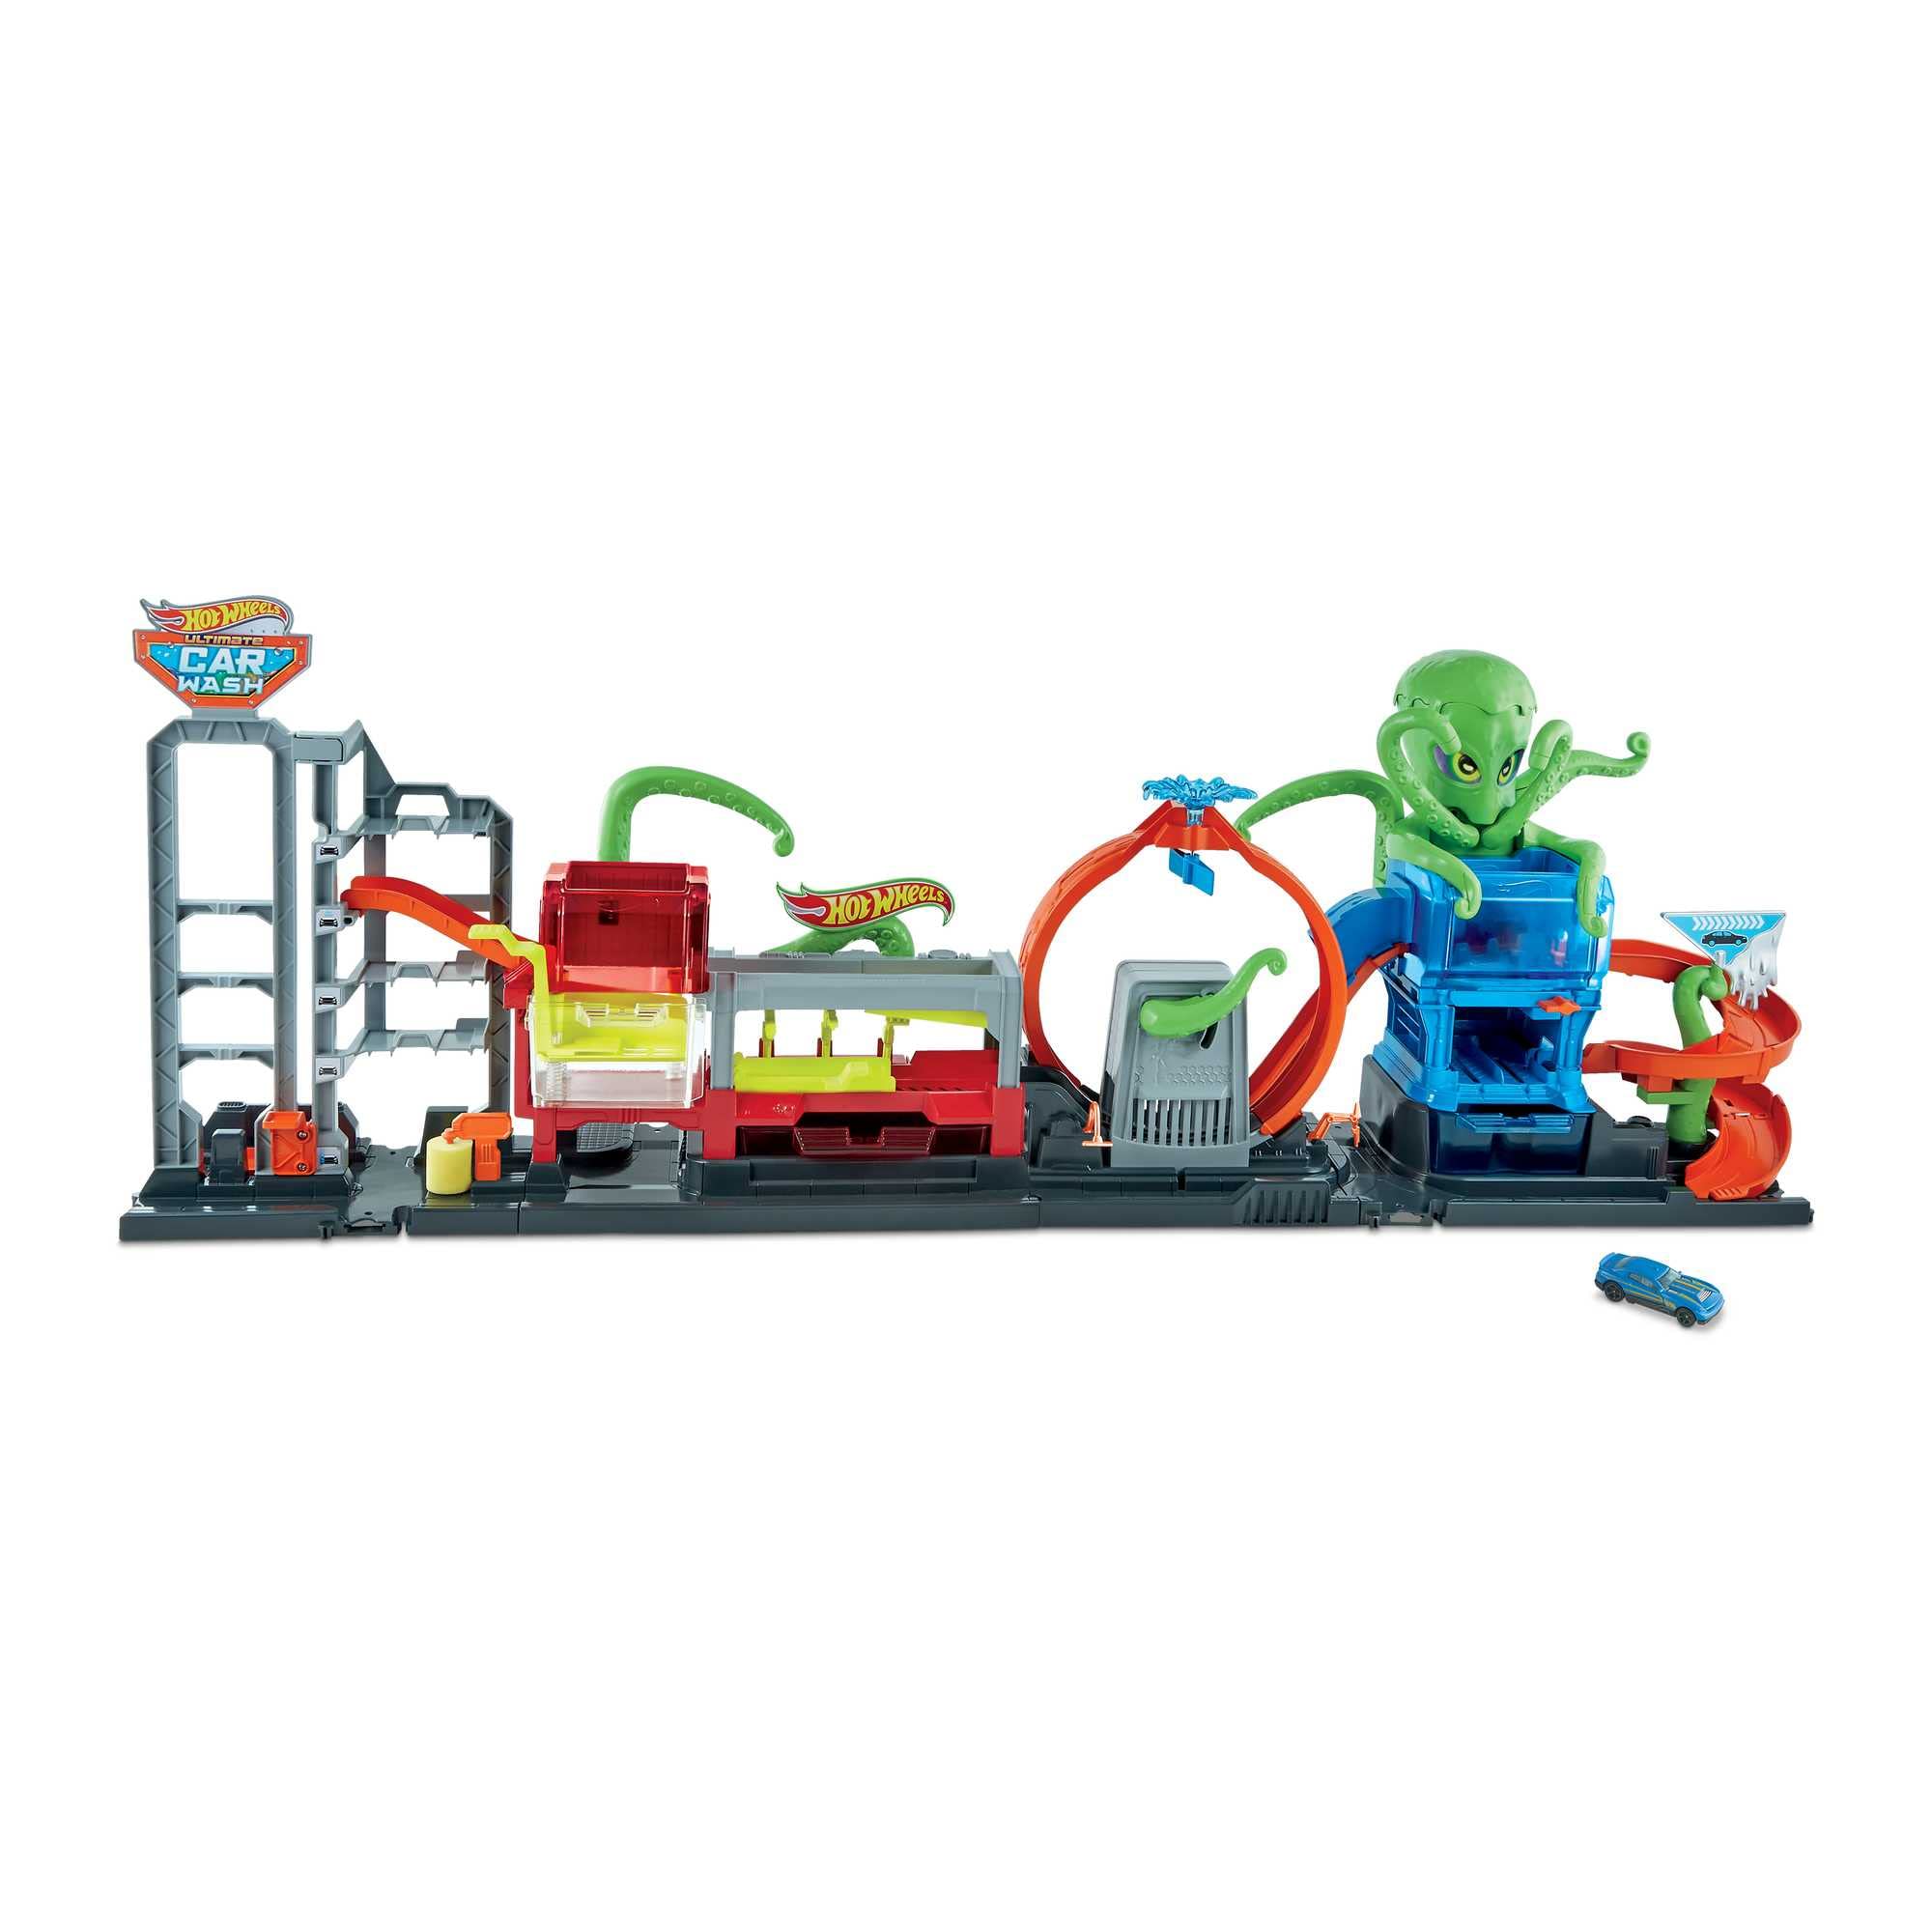 Hot Wheels City Ultimate Octo Car Wash Playset with No-Spill Water Tanks & 1 Color Reveal Car that Transforms with Water, 4+ ft Long, Connects to Other Sets, Gift for Kids 4 Years Old & Up